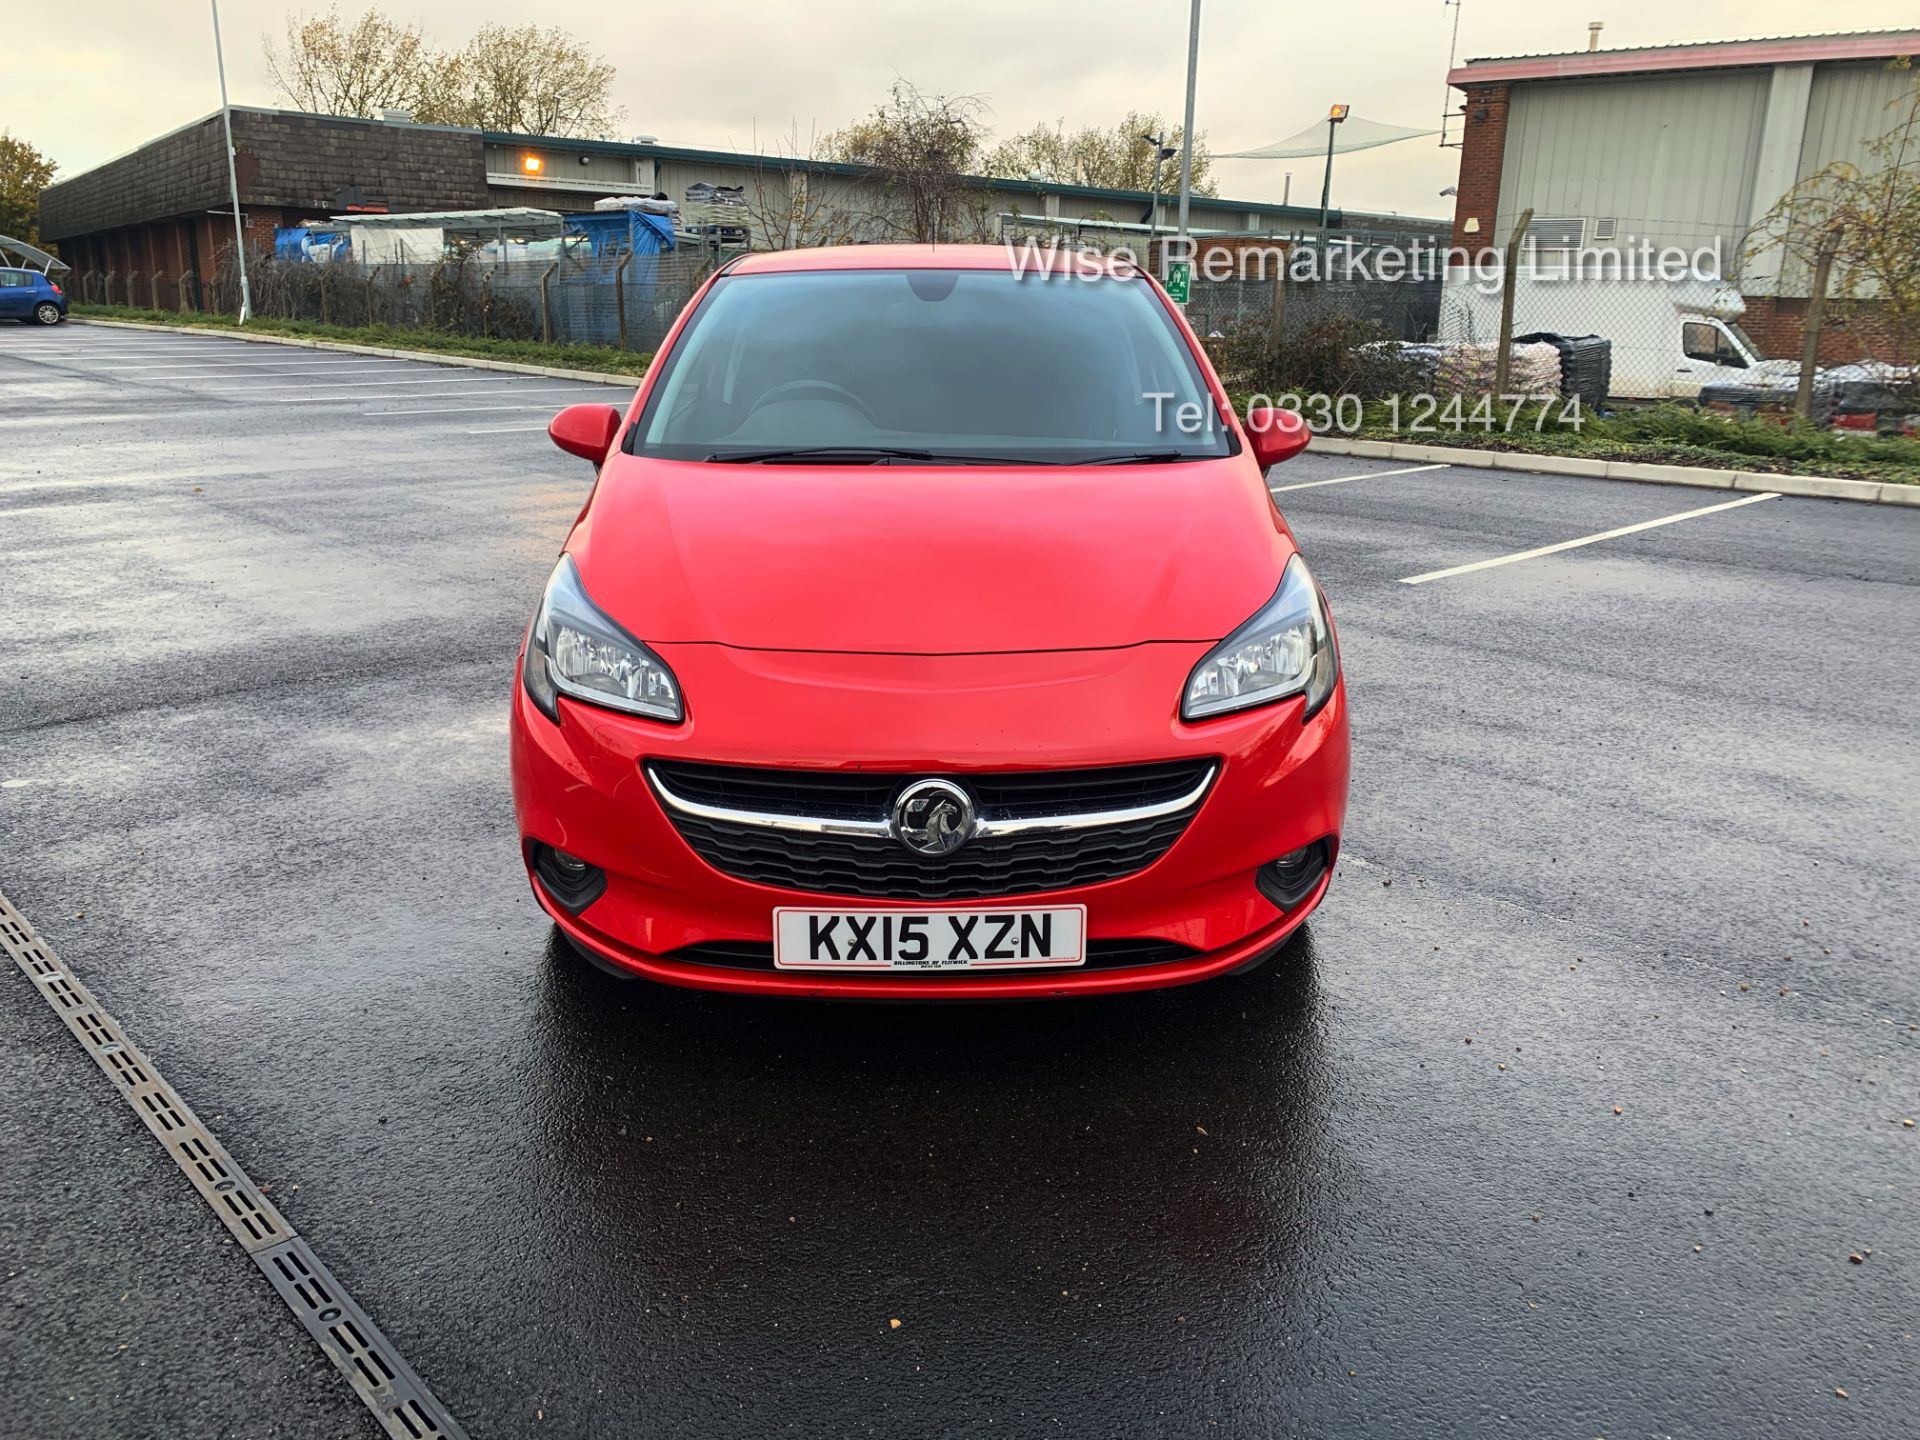 Vauxhall Corsa 1.4 Turbo Excite AC Ecoflex - 2015 15 Reg - Heated Seats - Touch Screen **TOP SPEC** - Image 2 of 22